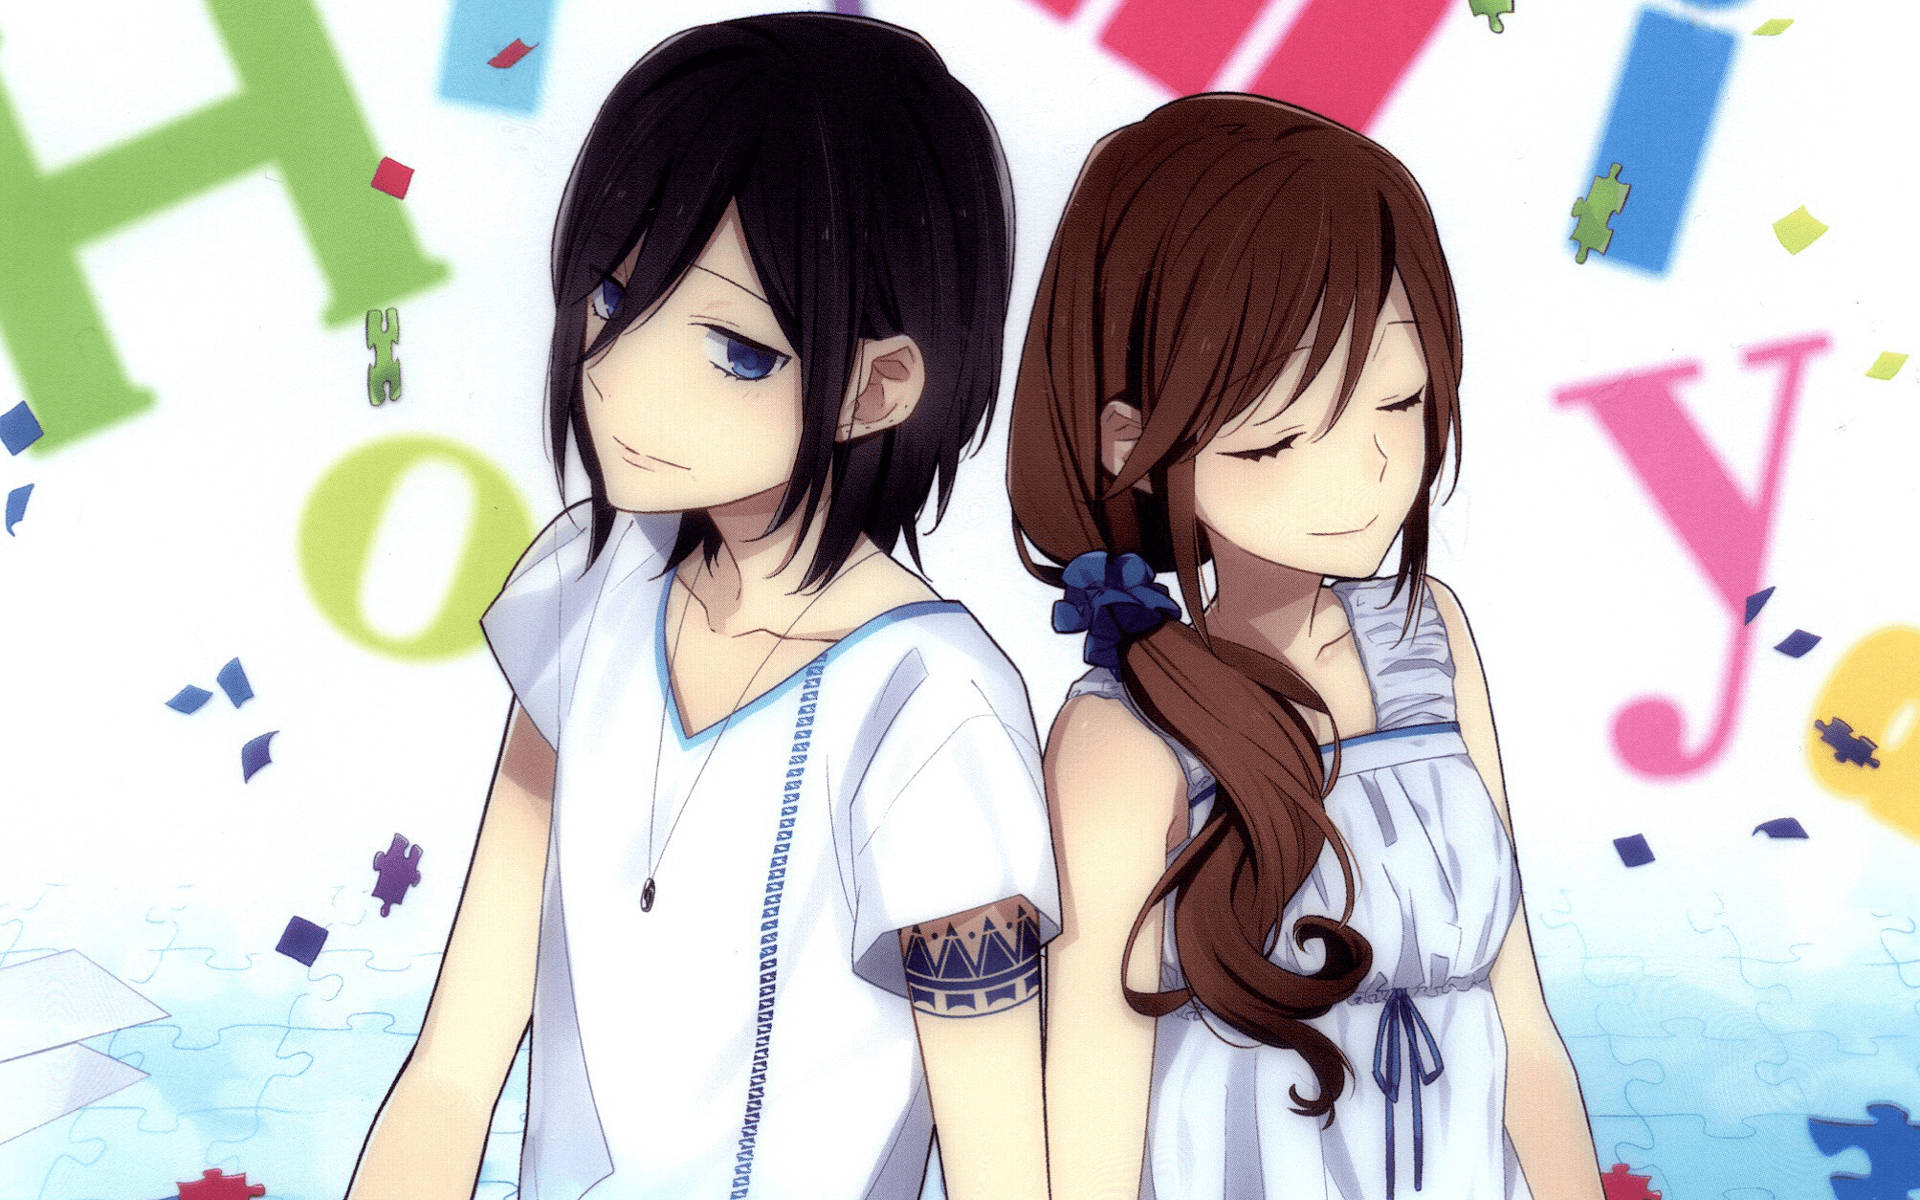 Horimiya Couple In White Outfits Wallpaper